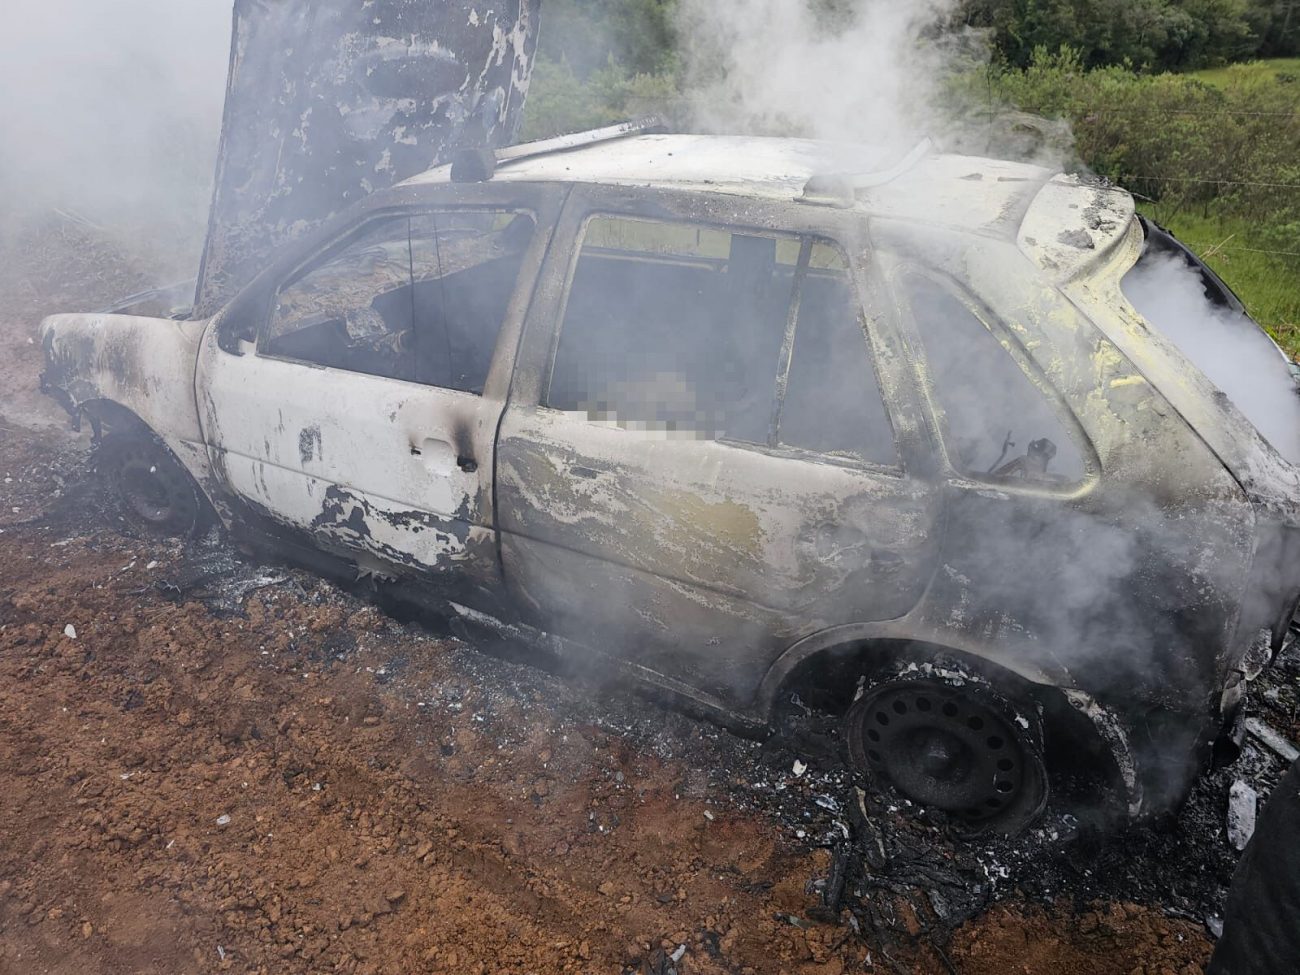 Firefighters found a car engulfed in flames and a body.  The victim has not been identified and the case is being handled by the Civil Police and the Scientific Police.  - Military Fire Department/Reproduction/ND